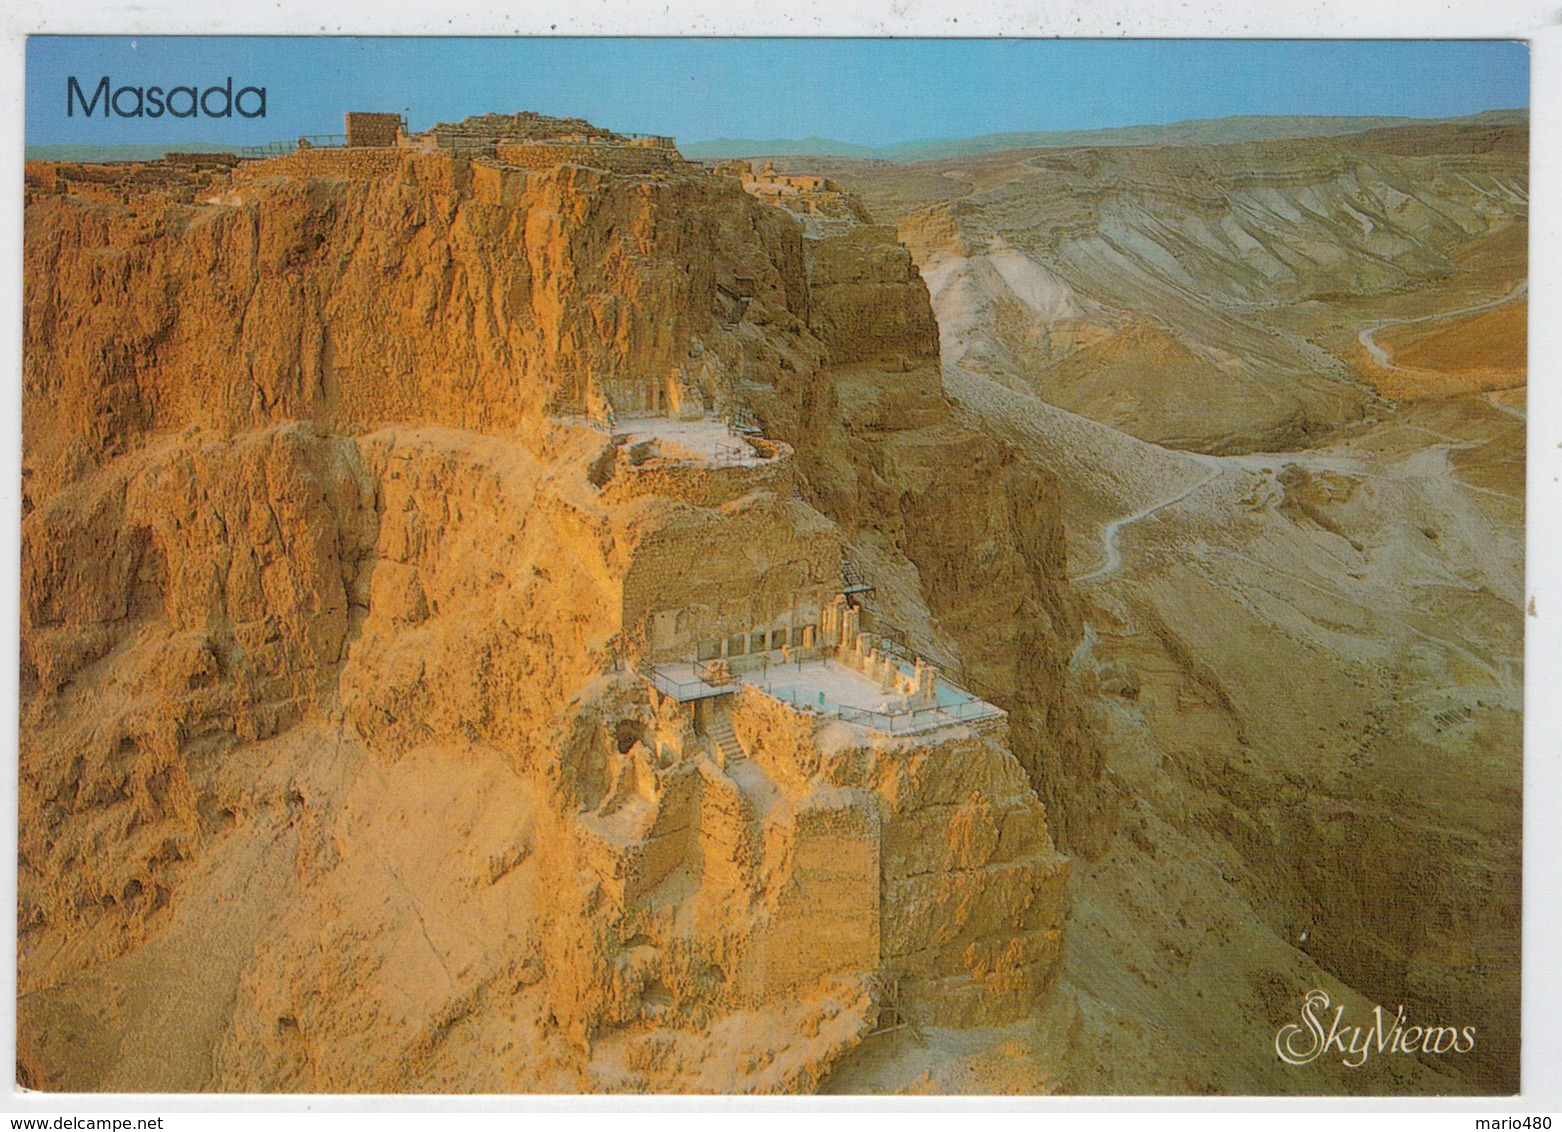 MAXICARD    MASADA  AERIAL  VIEW OF  THE HEROD'S NORTHERN  PALACE VIEW  FRO  THE  AIR      (NUOVA) - Israele